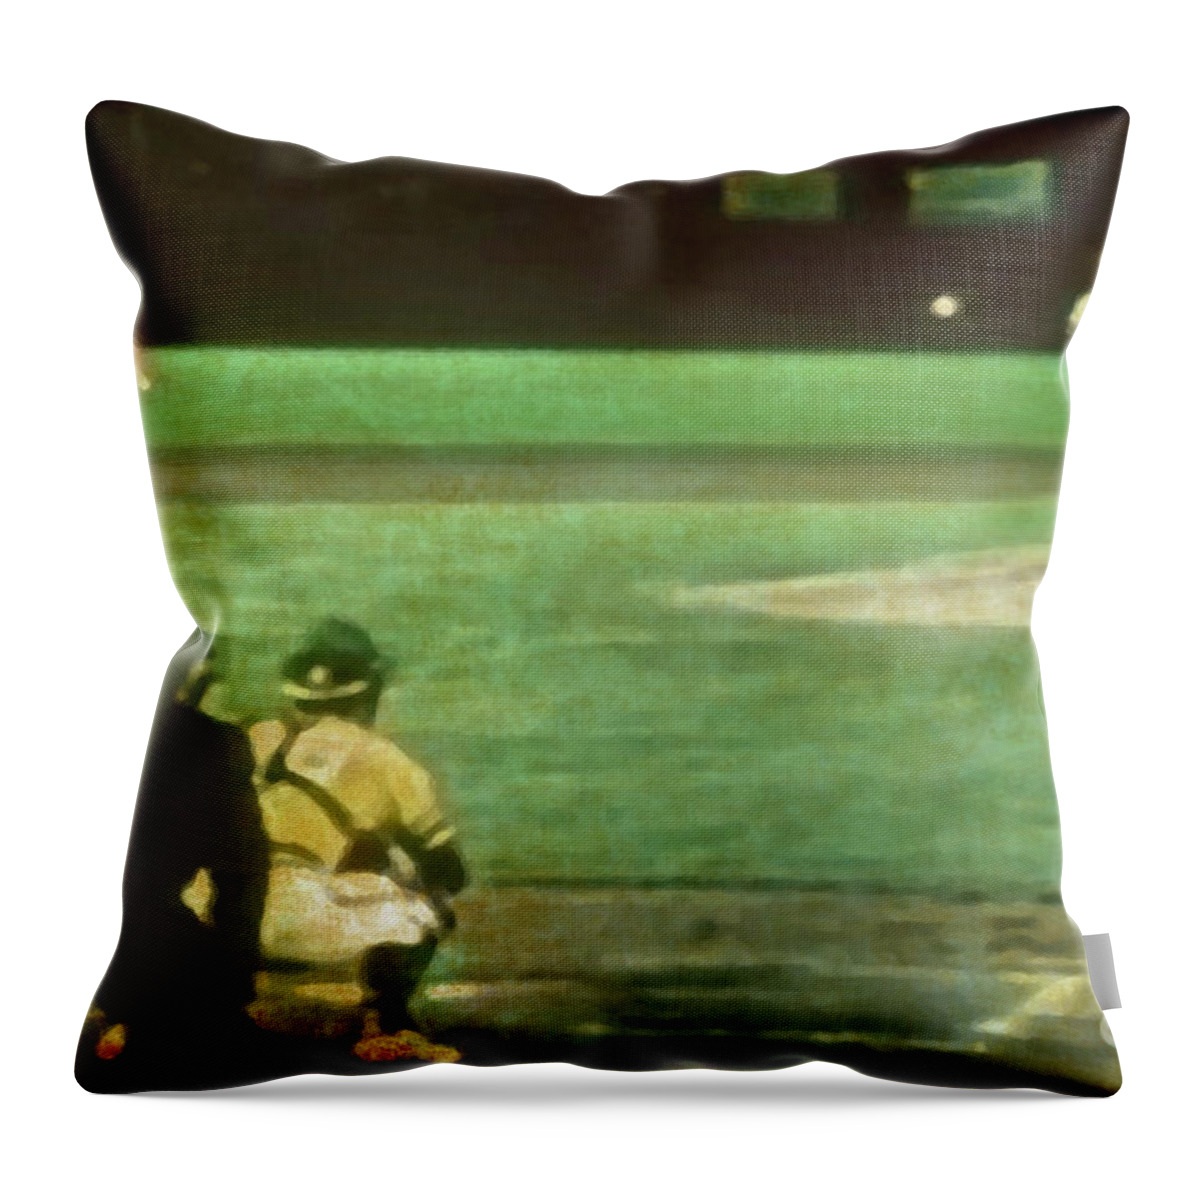 Baseball Throw Pillow featuring the photograph Baseball 70s Style by Billy Knight